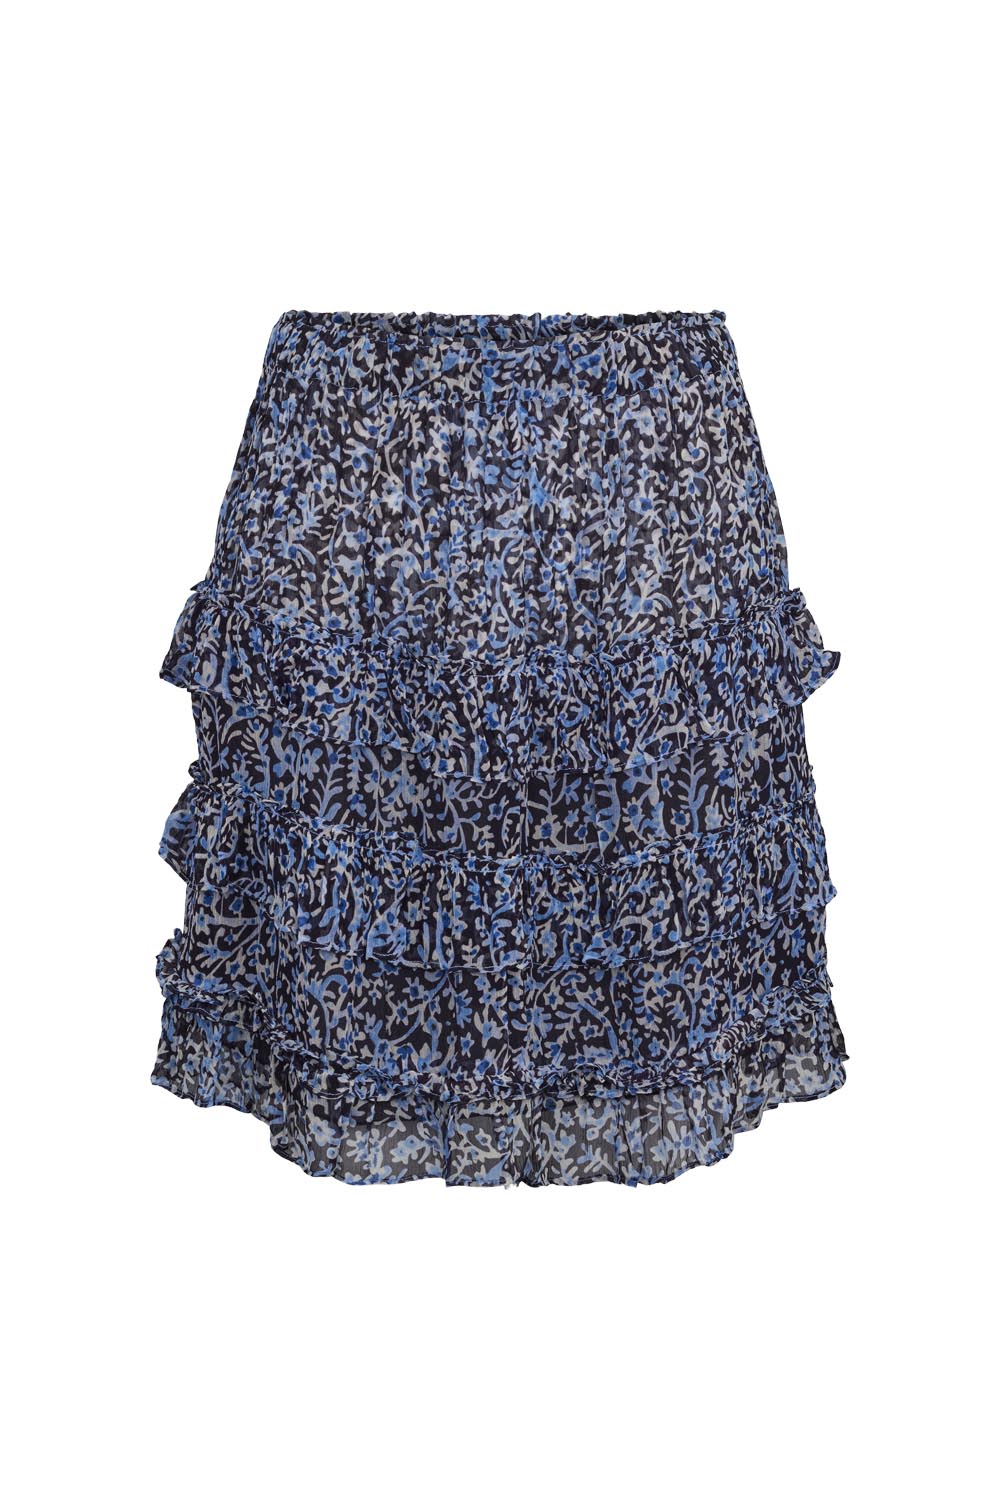 Blue mini skirt with ruffle details and elasticated waistband